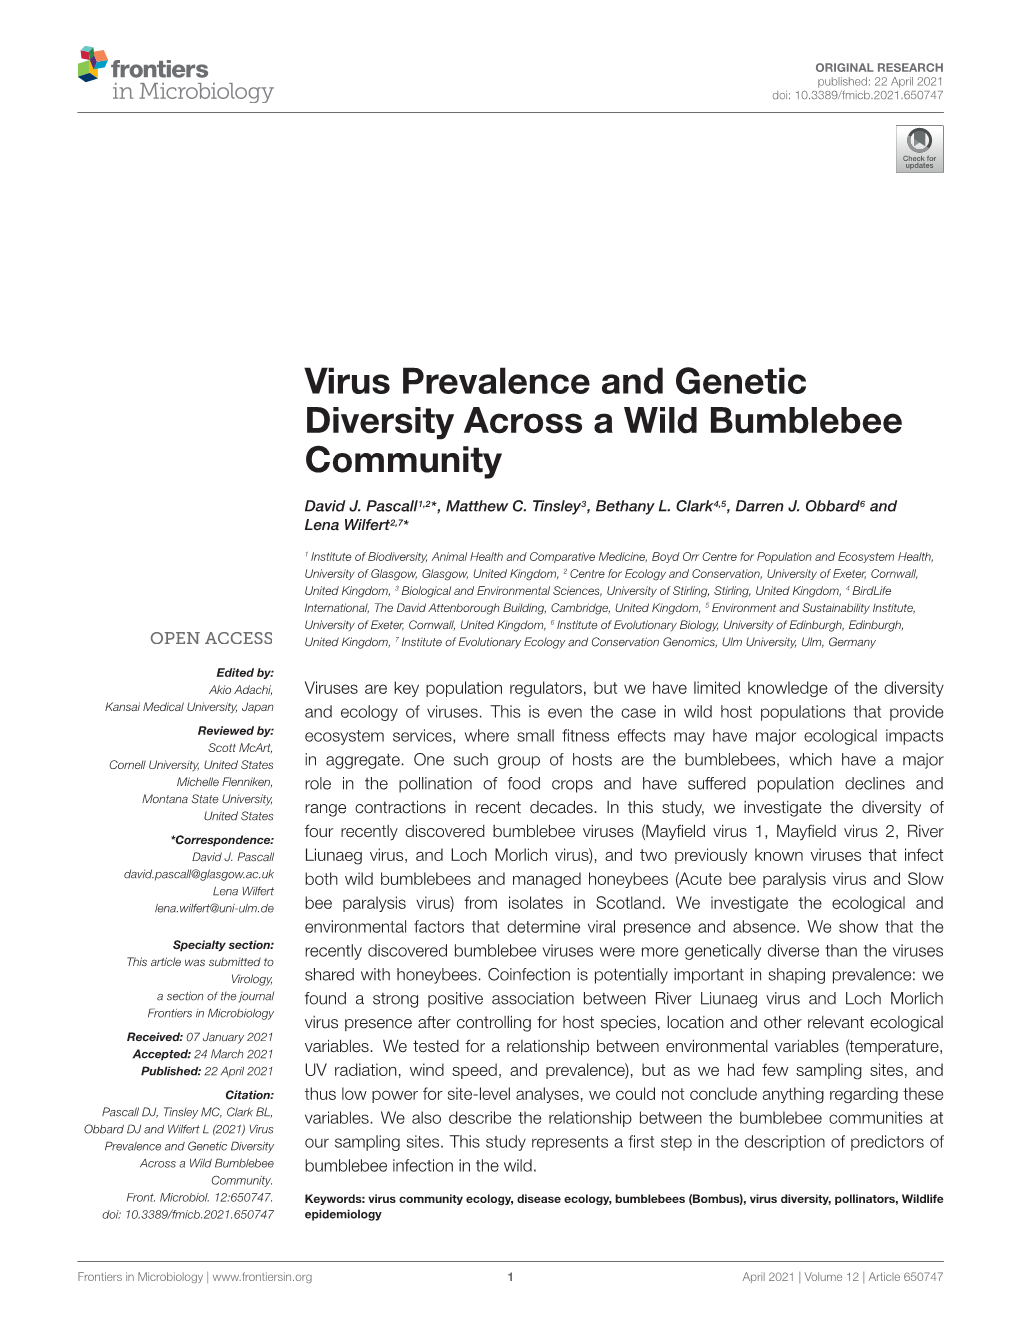 Virus Prevalence and Genetic Diversity Across a Wild Bumblebee Community